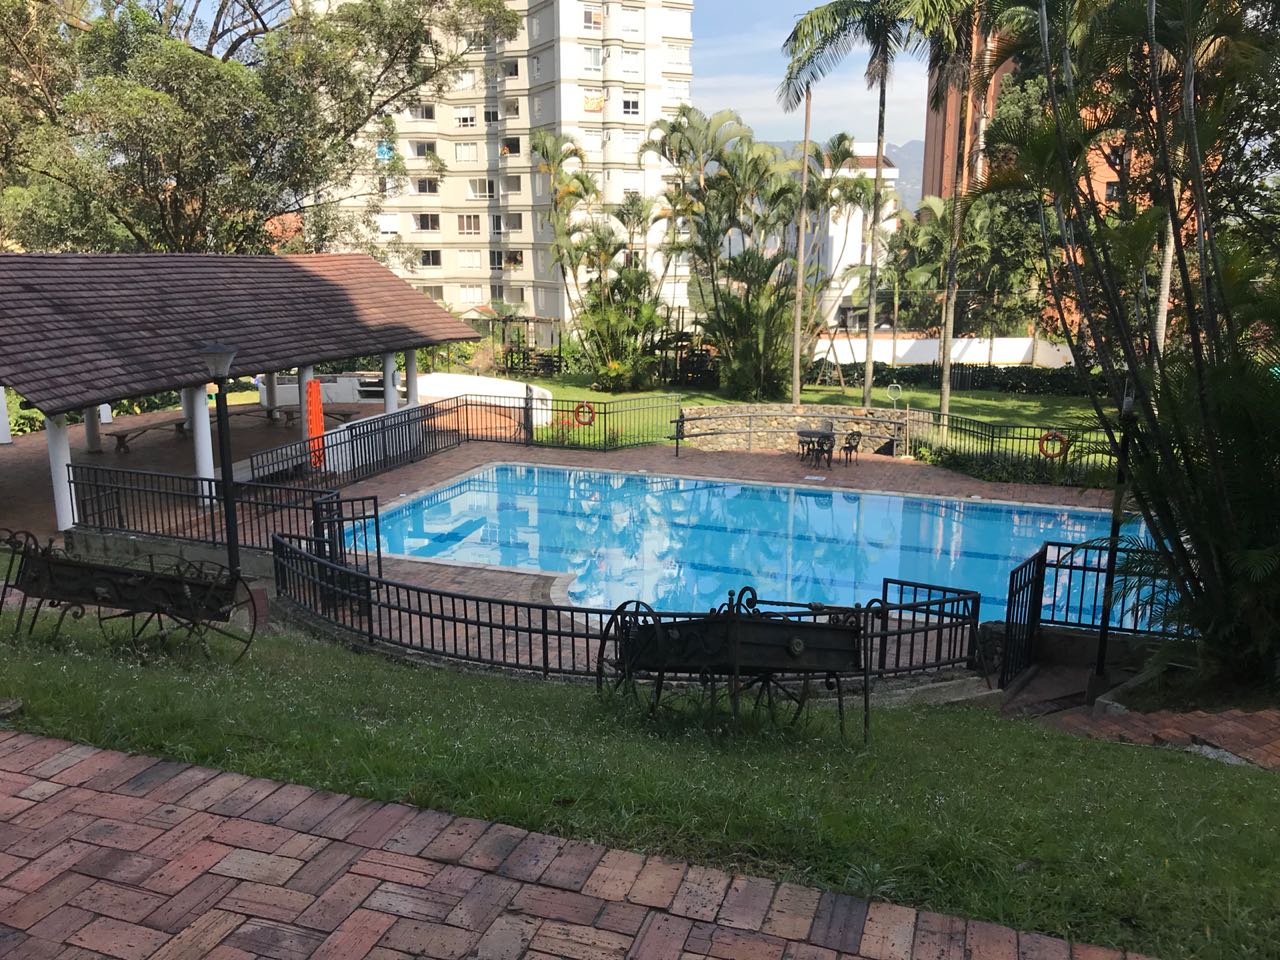 Low Cost Per Sq Meter, 4800 sq ft El Poblado Apartment With Views, Resort Style Pool, and Private Jacuzzi